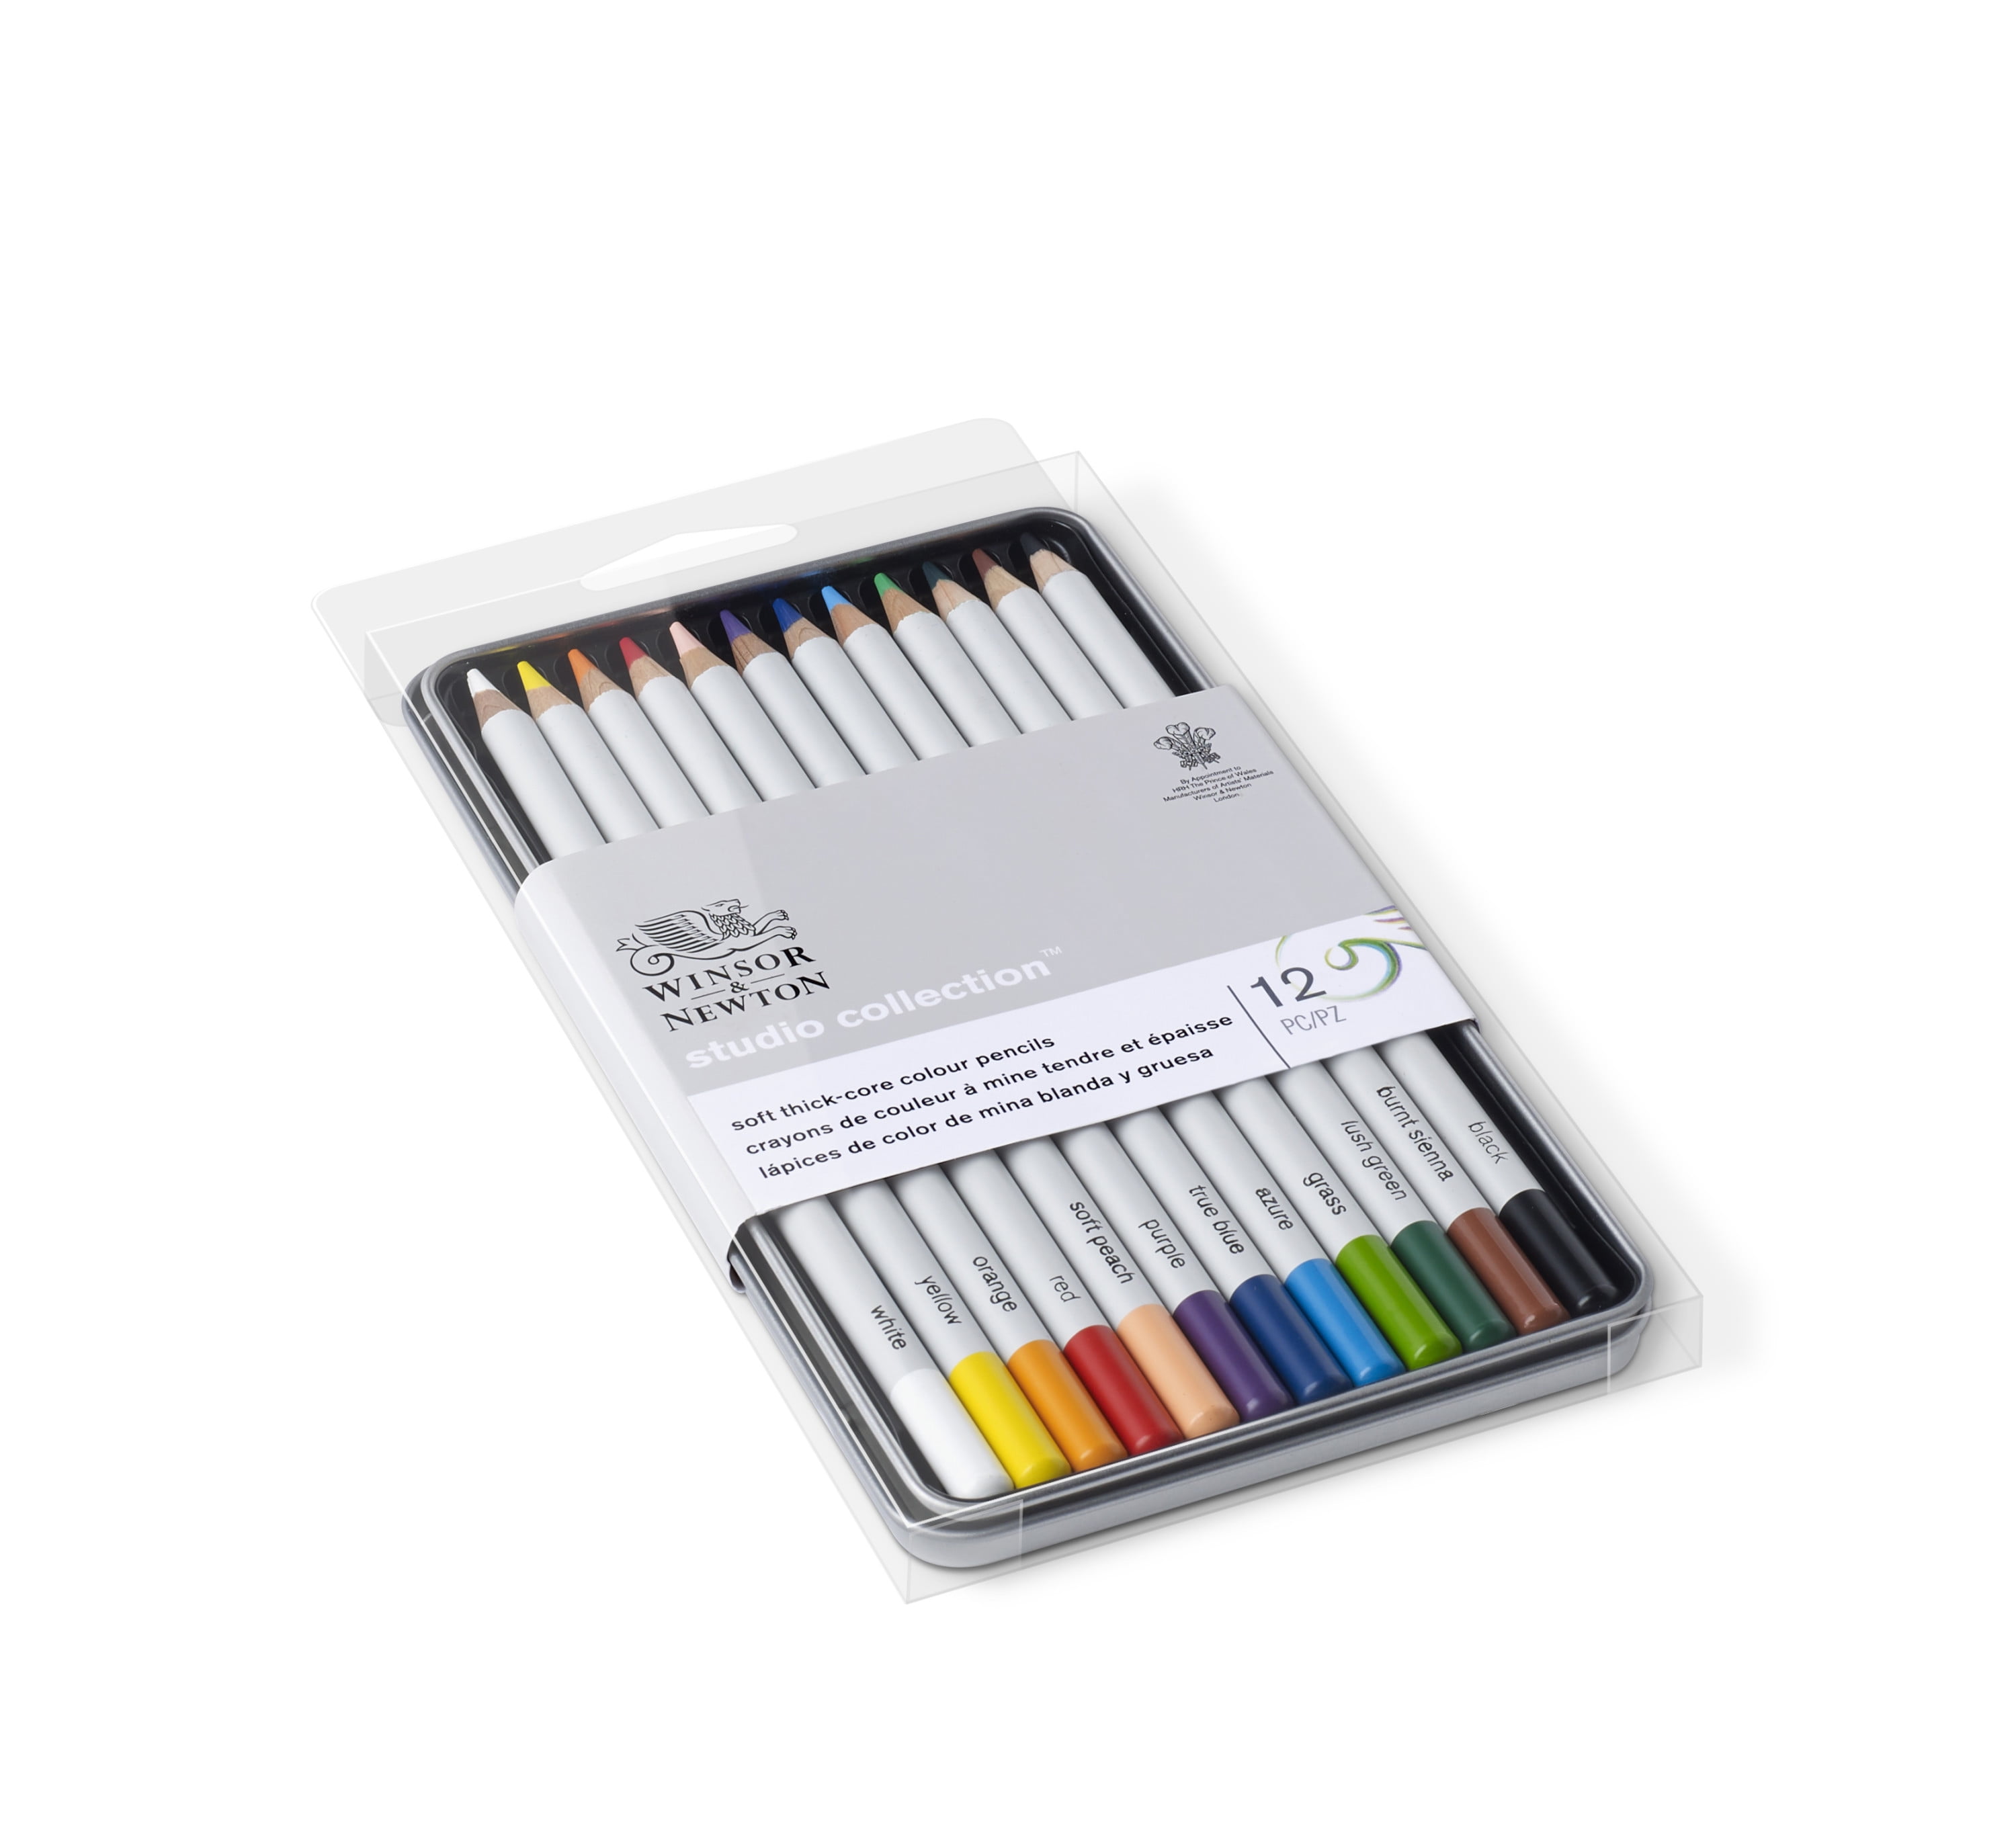  Derwent GraphiTine Colored Pencil Meadow 10 : Artists Pencils  : Arts, Crafts & Sewing